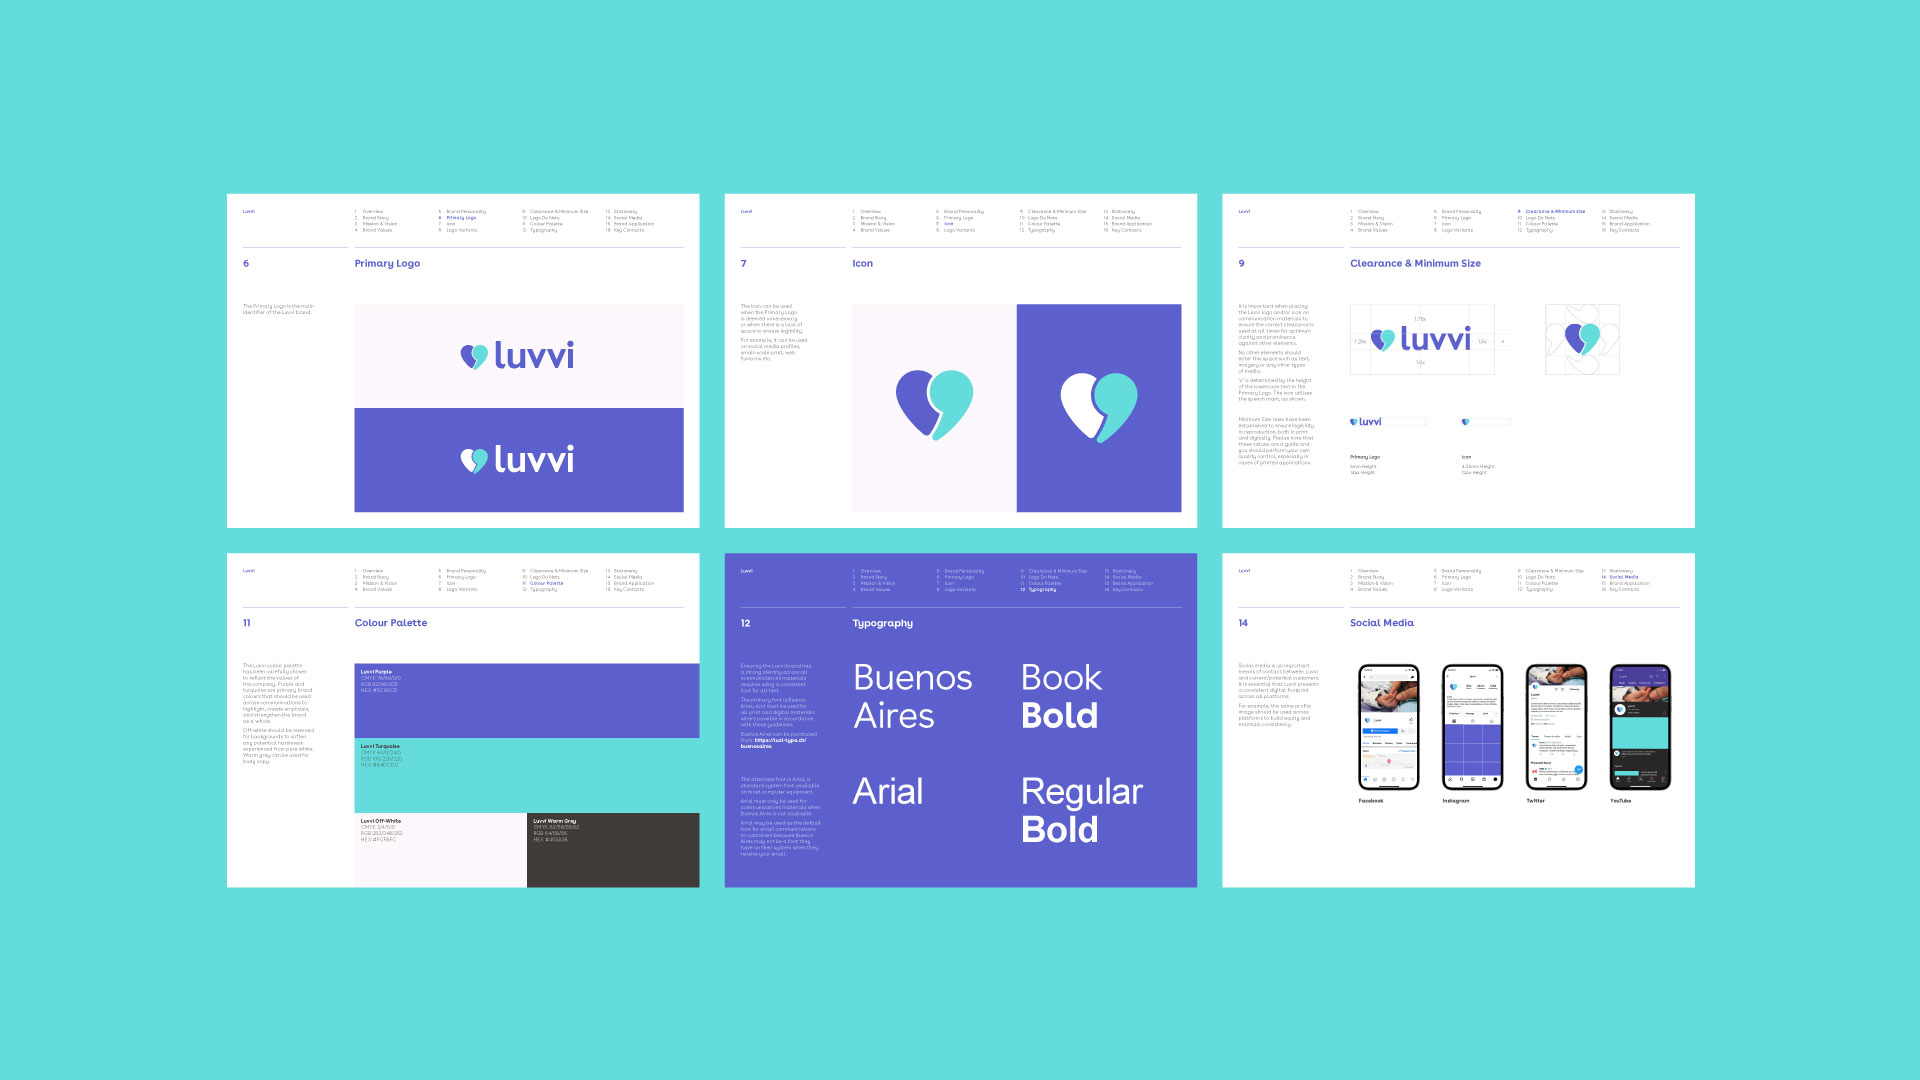 Brand design guidelines for Luvvi, featuring logo and icon guidance, colour palette, fonts and social media assets.